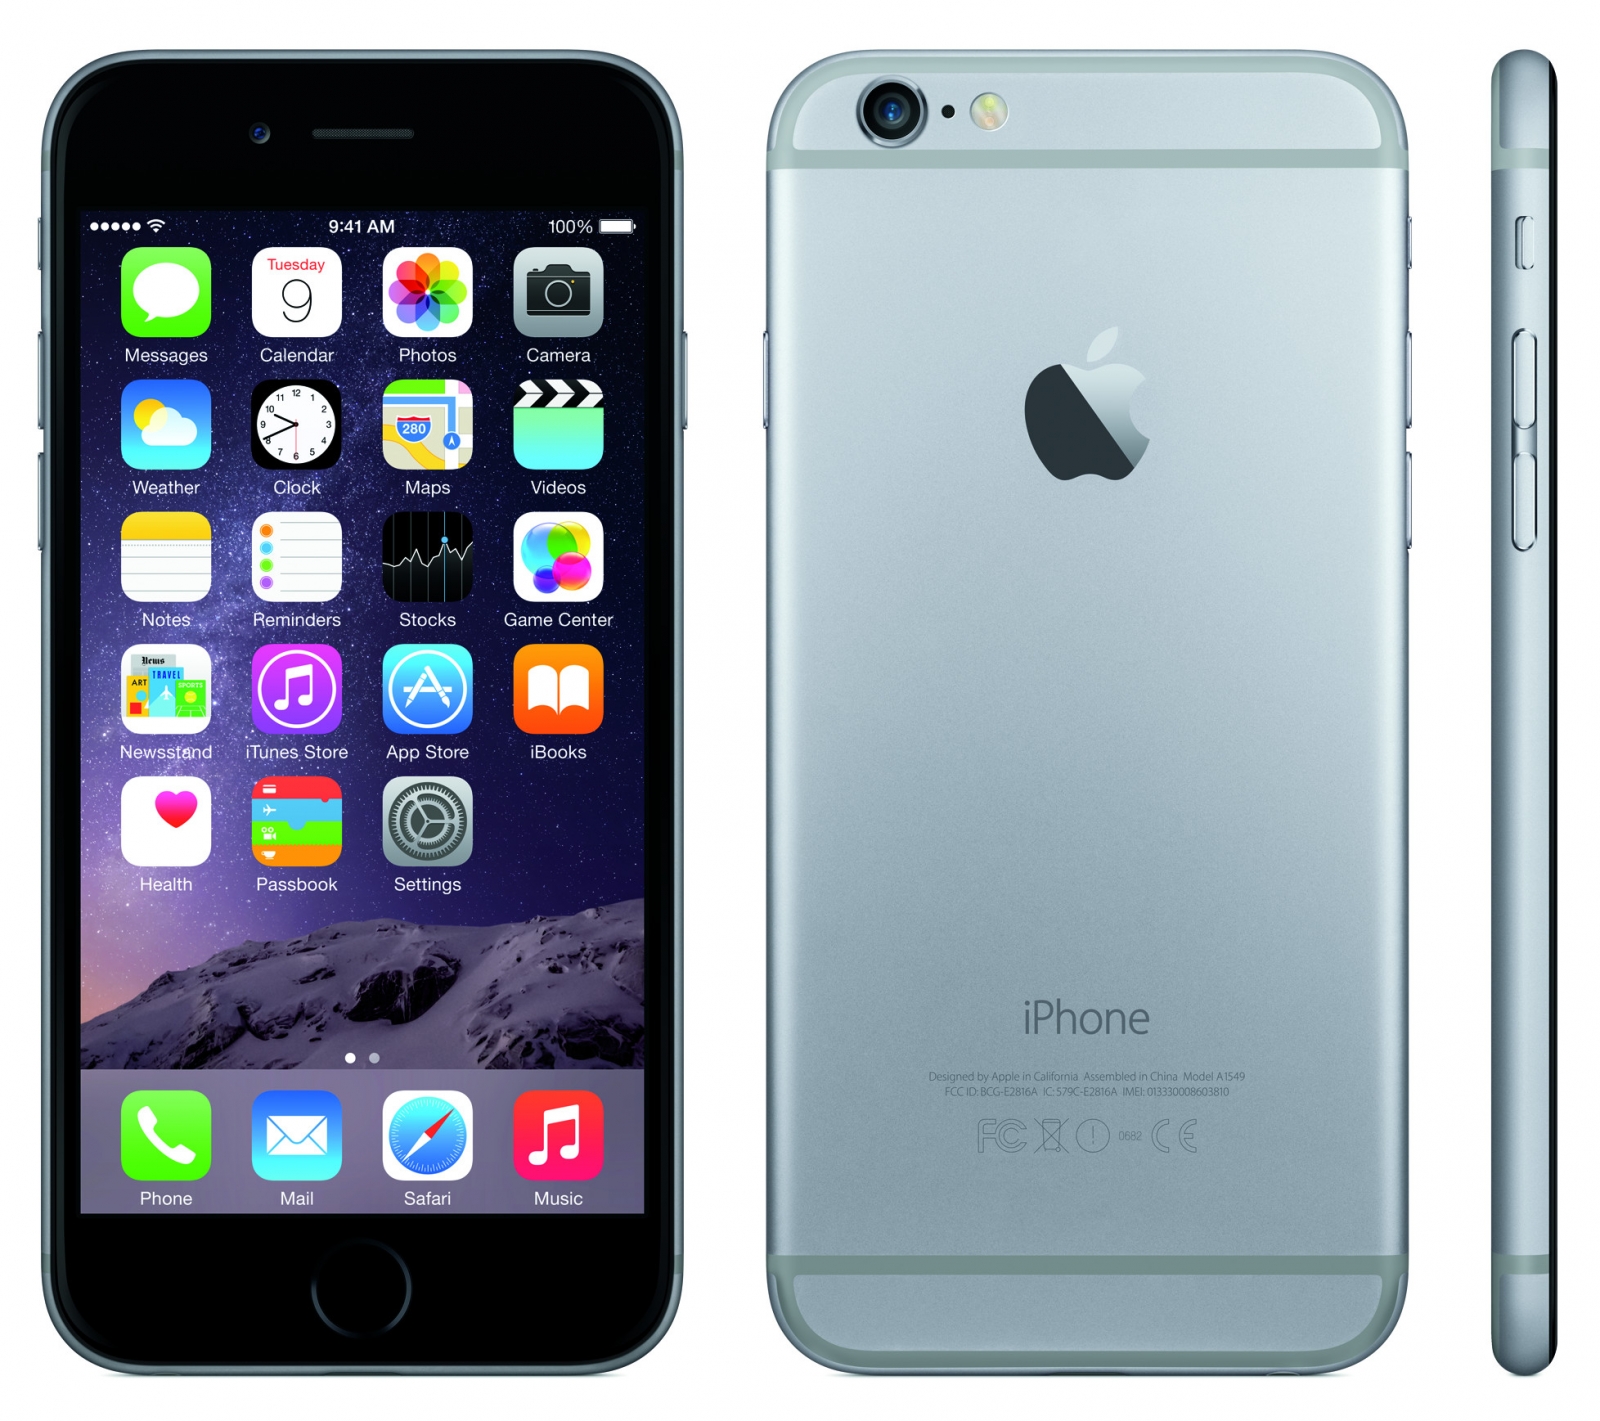 Apple iPhone 6 and iPhone 6 Plus Already up for Sale Online in India